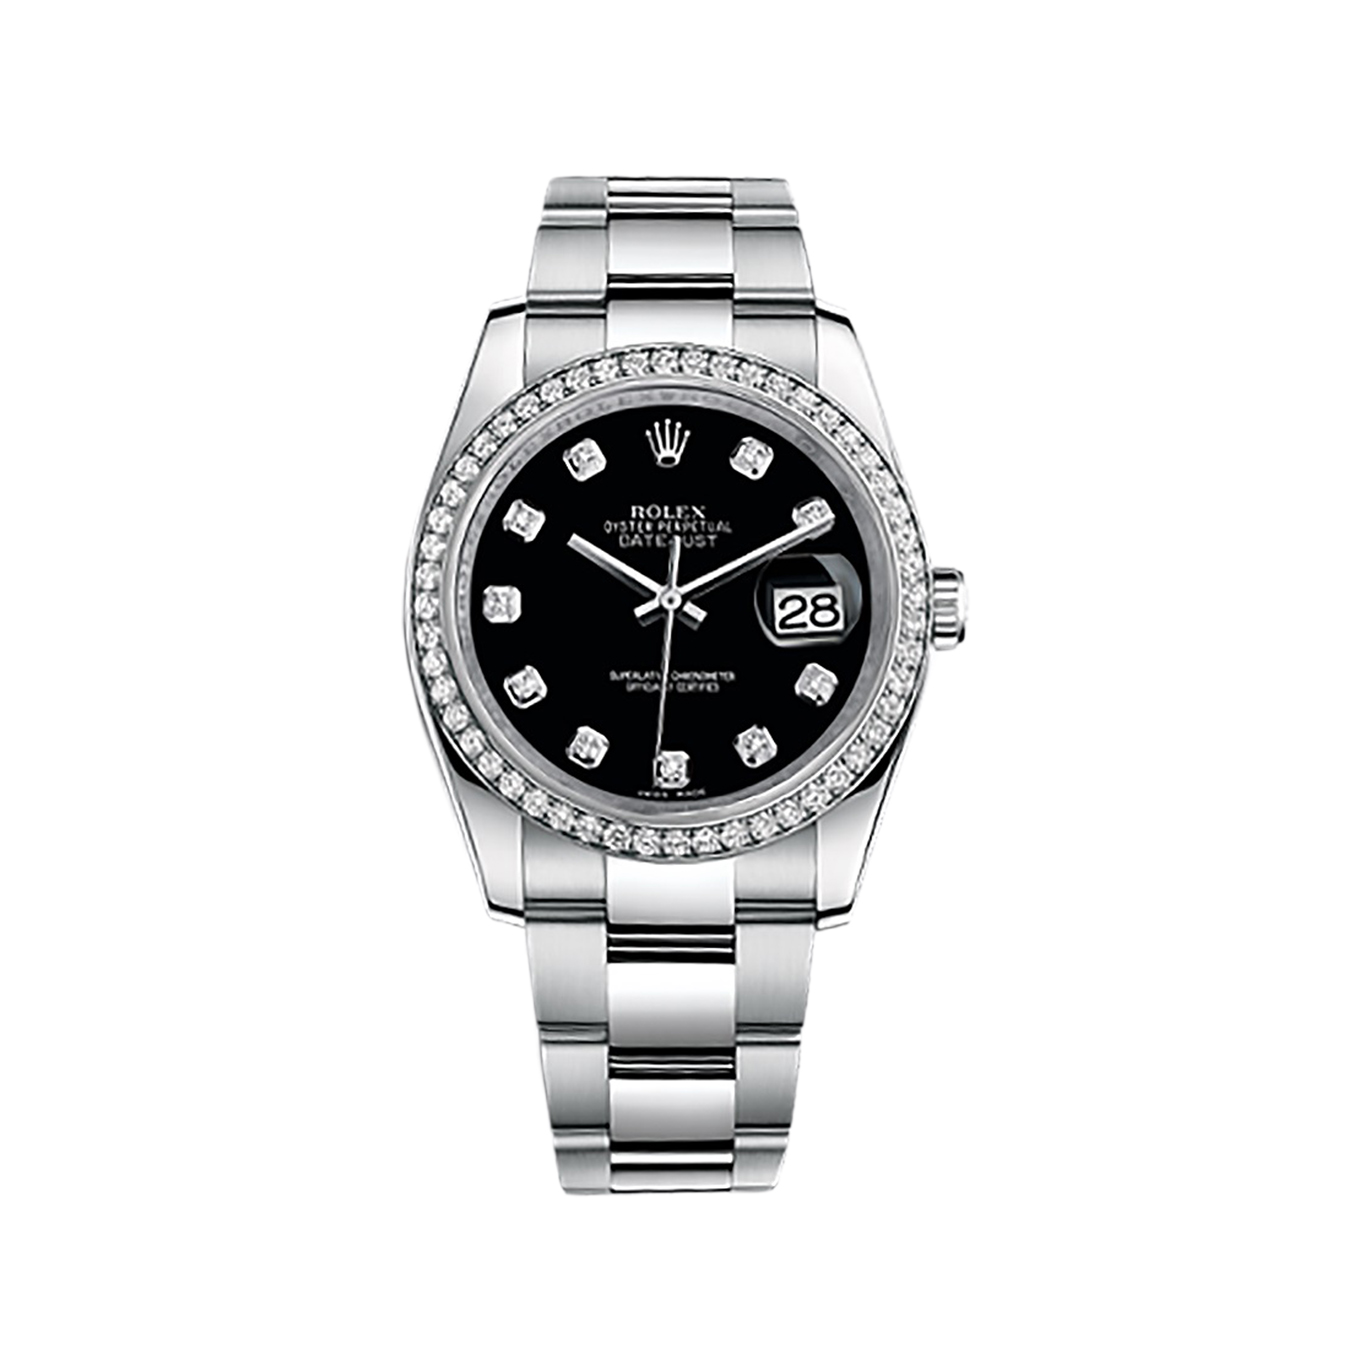 Datejust 36 116244 White Gold & Stainless Steel Watch (Black Set with Diamonds)